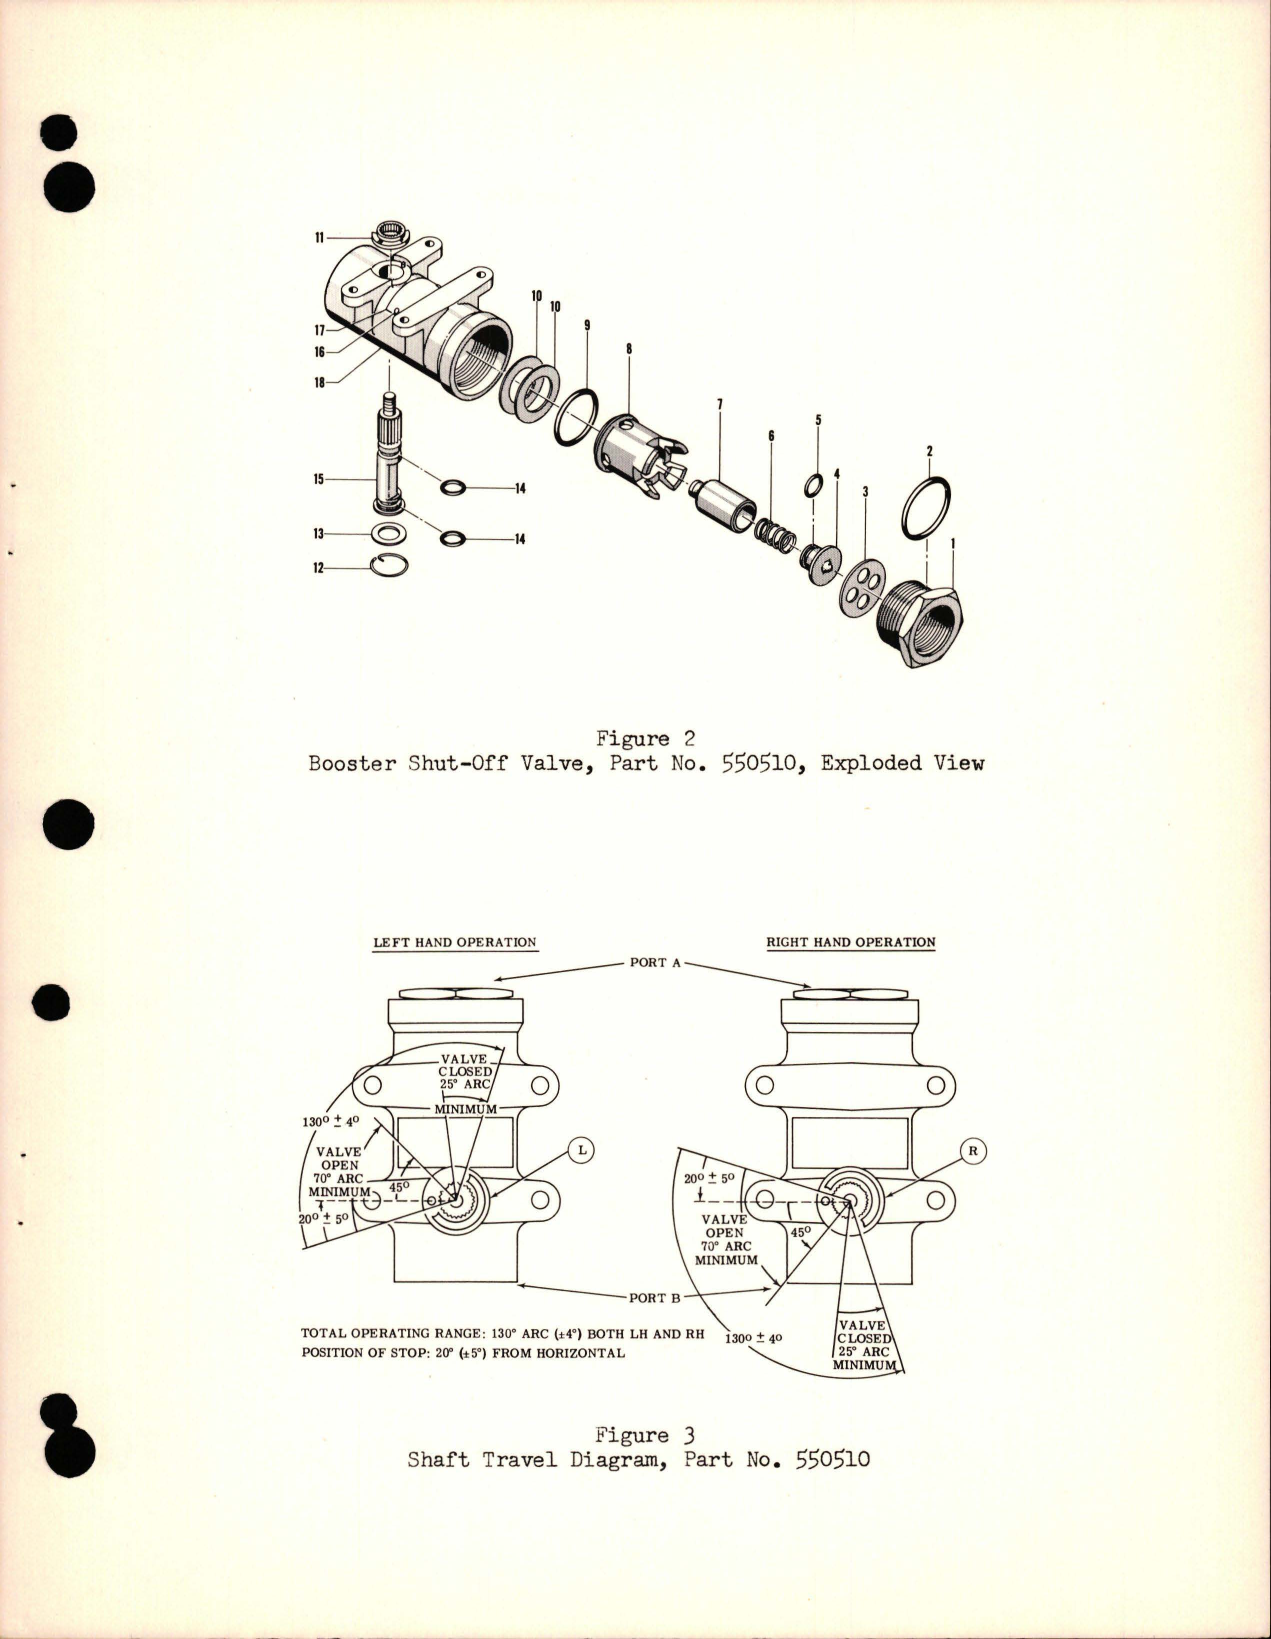 Sample page 5 from AirCorps Library document: Booster Shut-Off Valve - Parts 550510, 466620